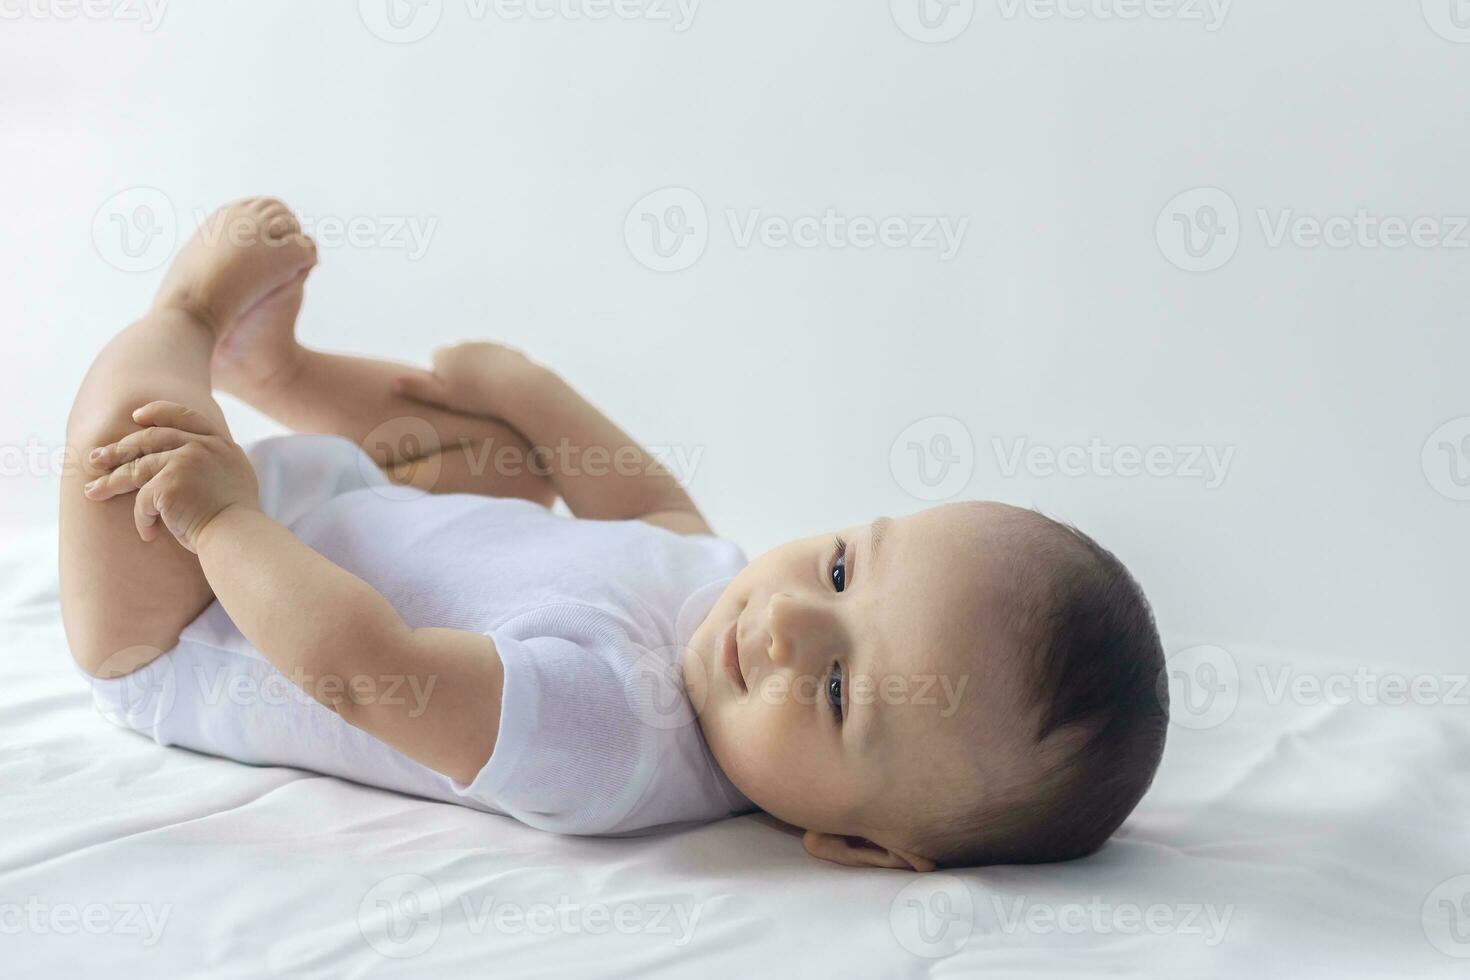 6-month baby having fun in white bedding. Cute baby lying on bed. Family, new life, childhood concept. photo